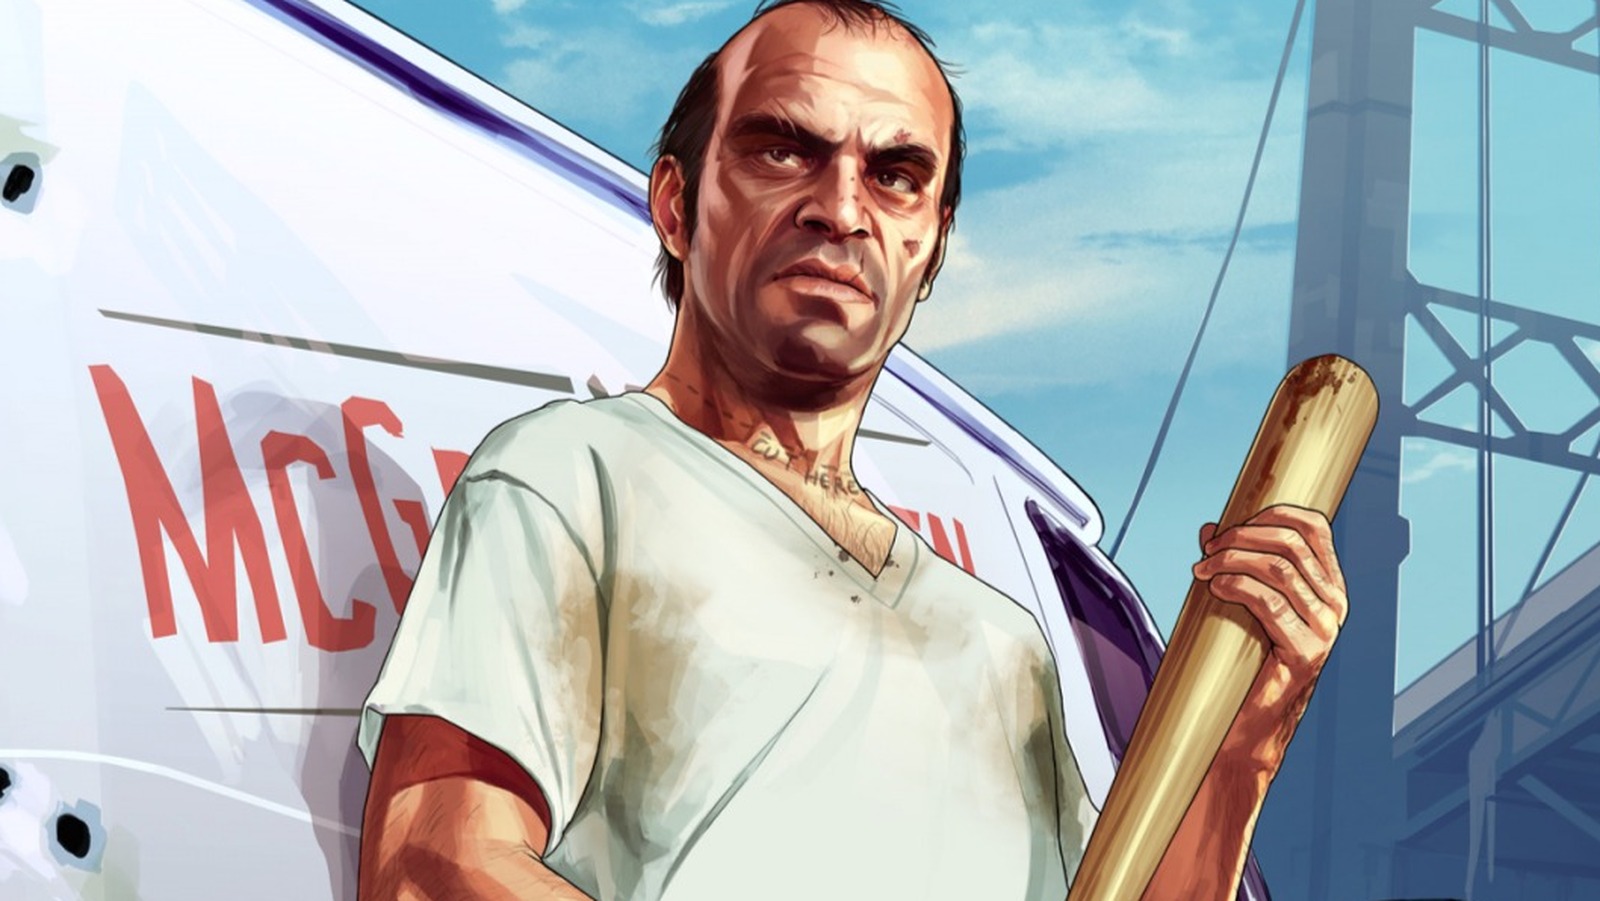 Niko Bellic Actor got paid $100,000 for Grand Theft Auto IV